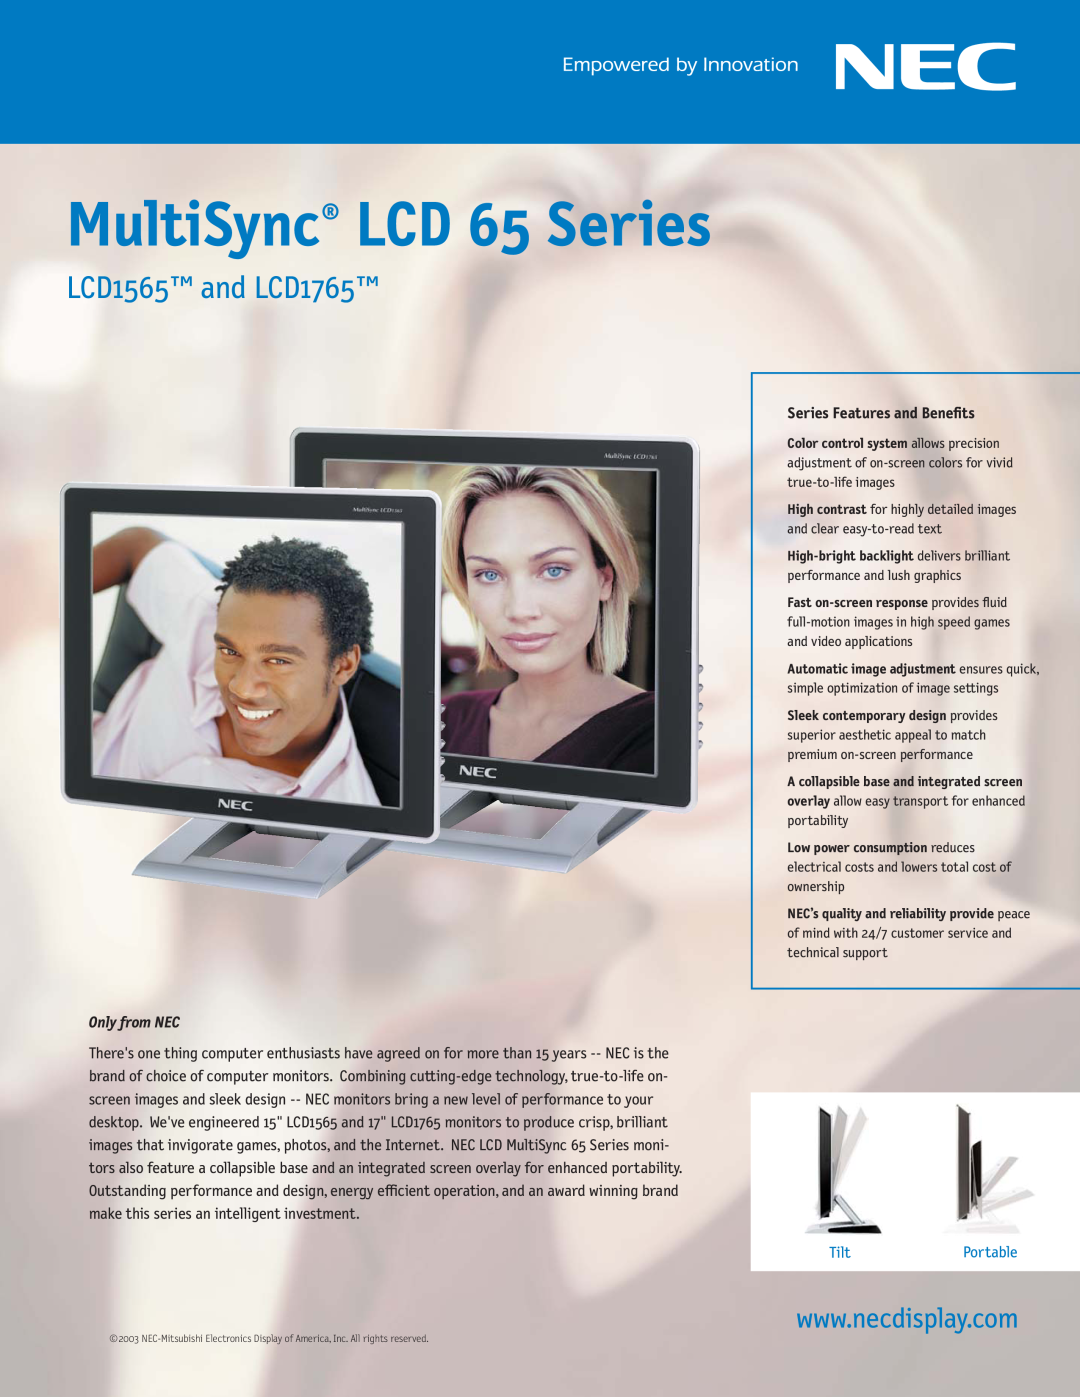 NEC manual MultiSync LCD 65 Series, LCD1565 and LCD1765, Only from NEC, Series Features and Benefits, TiltPortable 